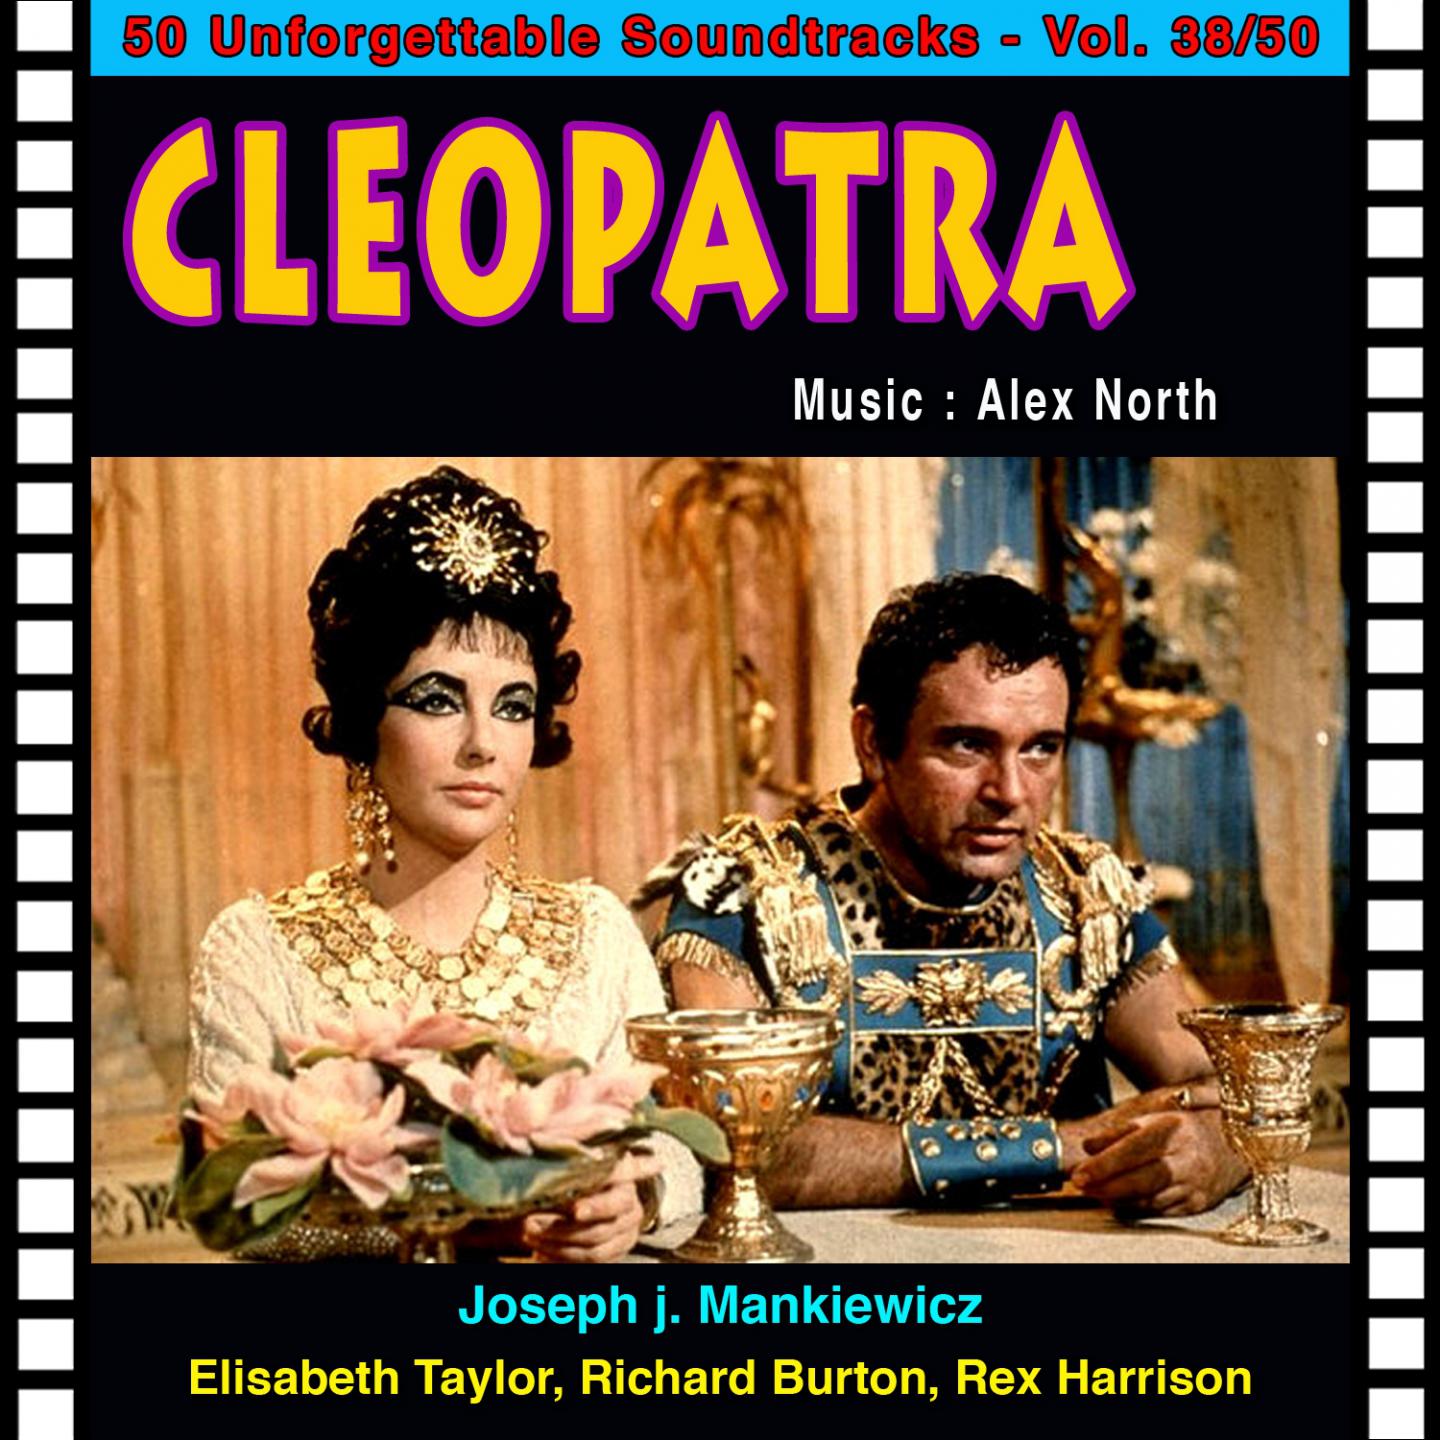 Anthony Wait Cle opatre  Cleopatra